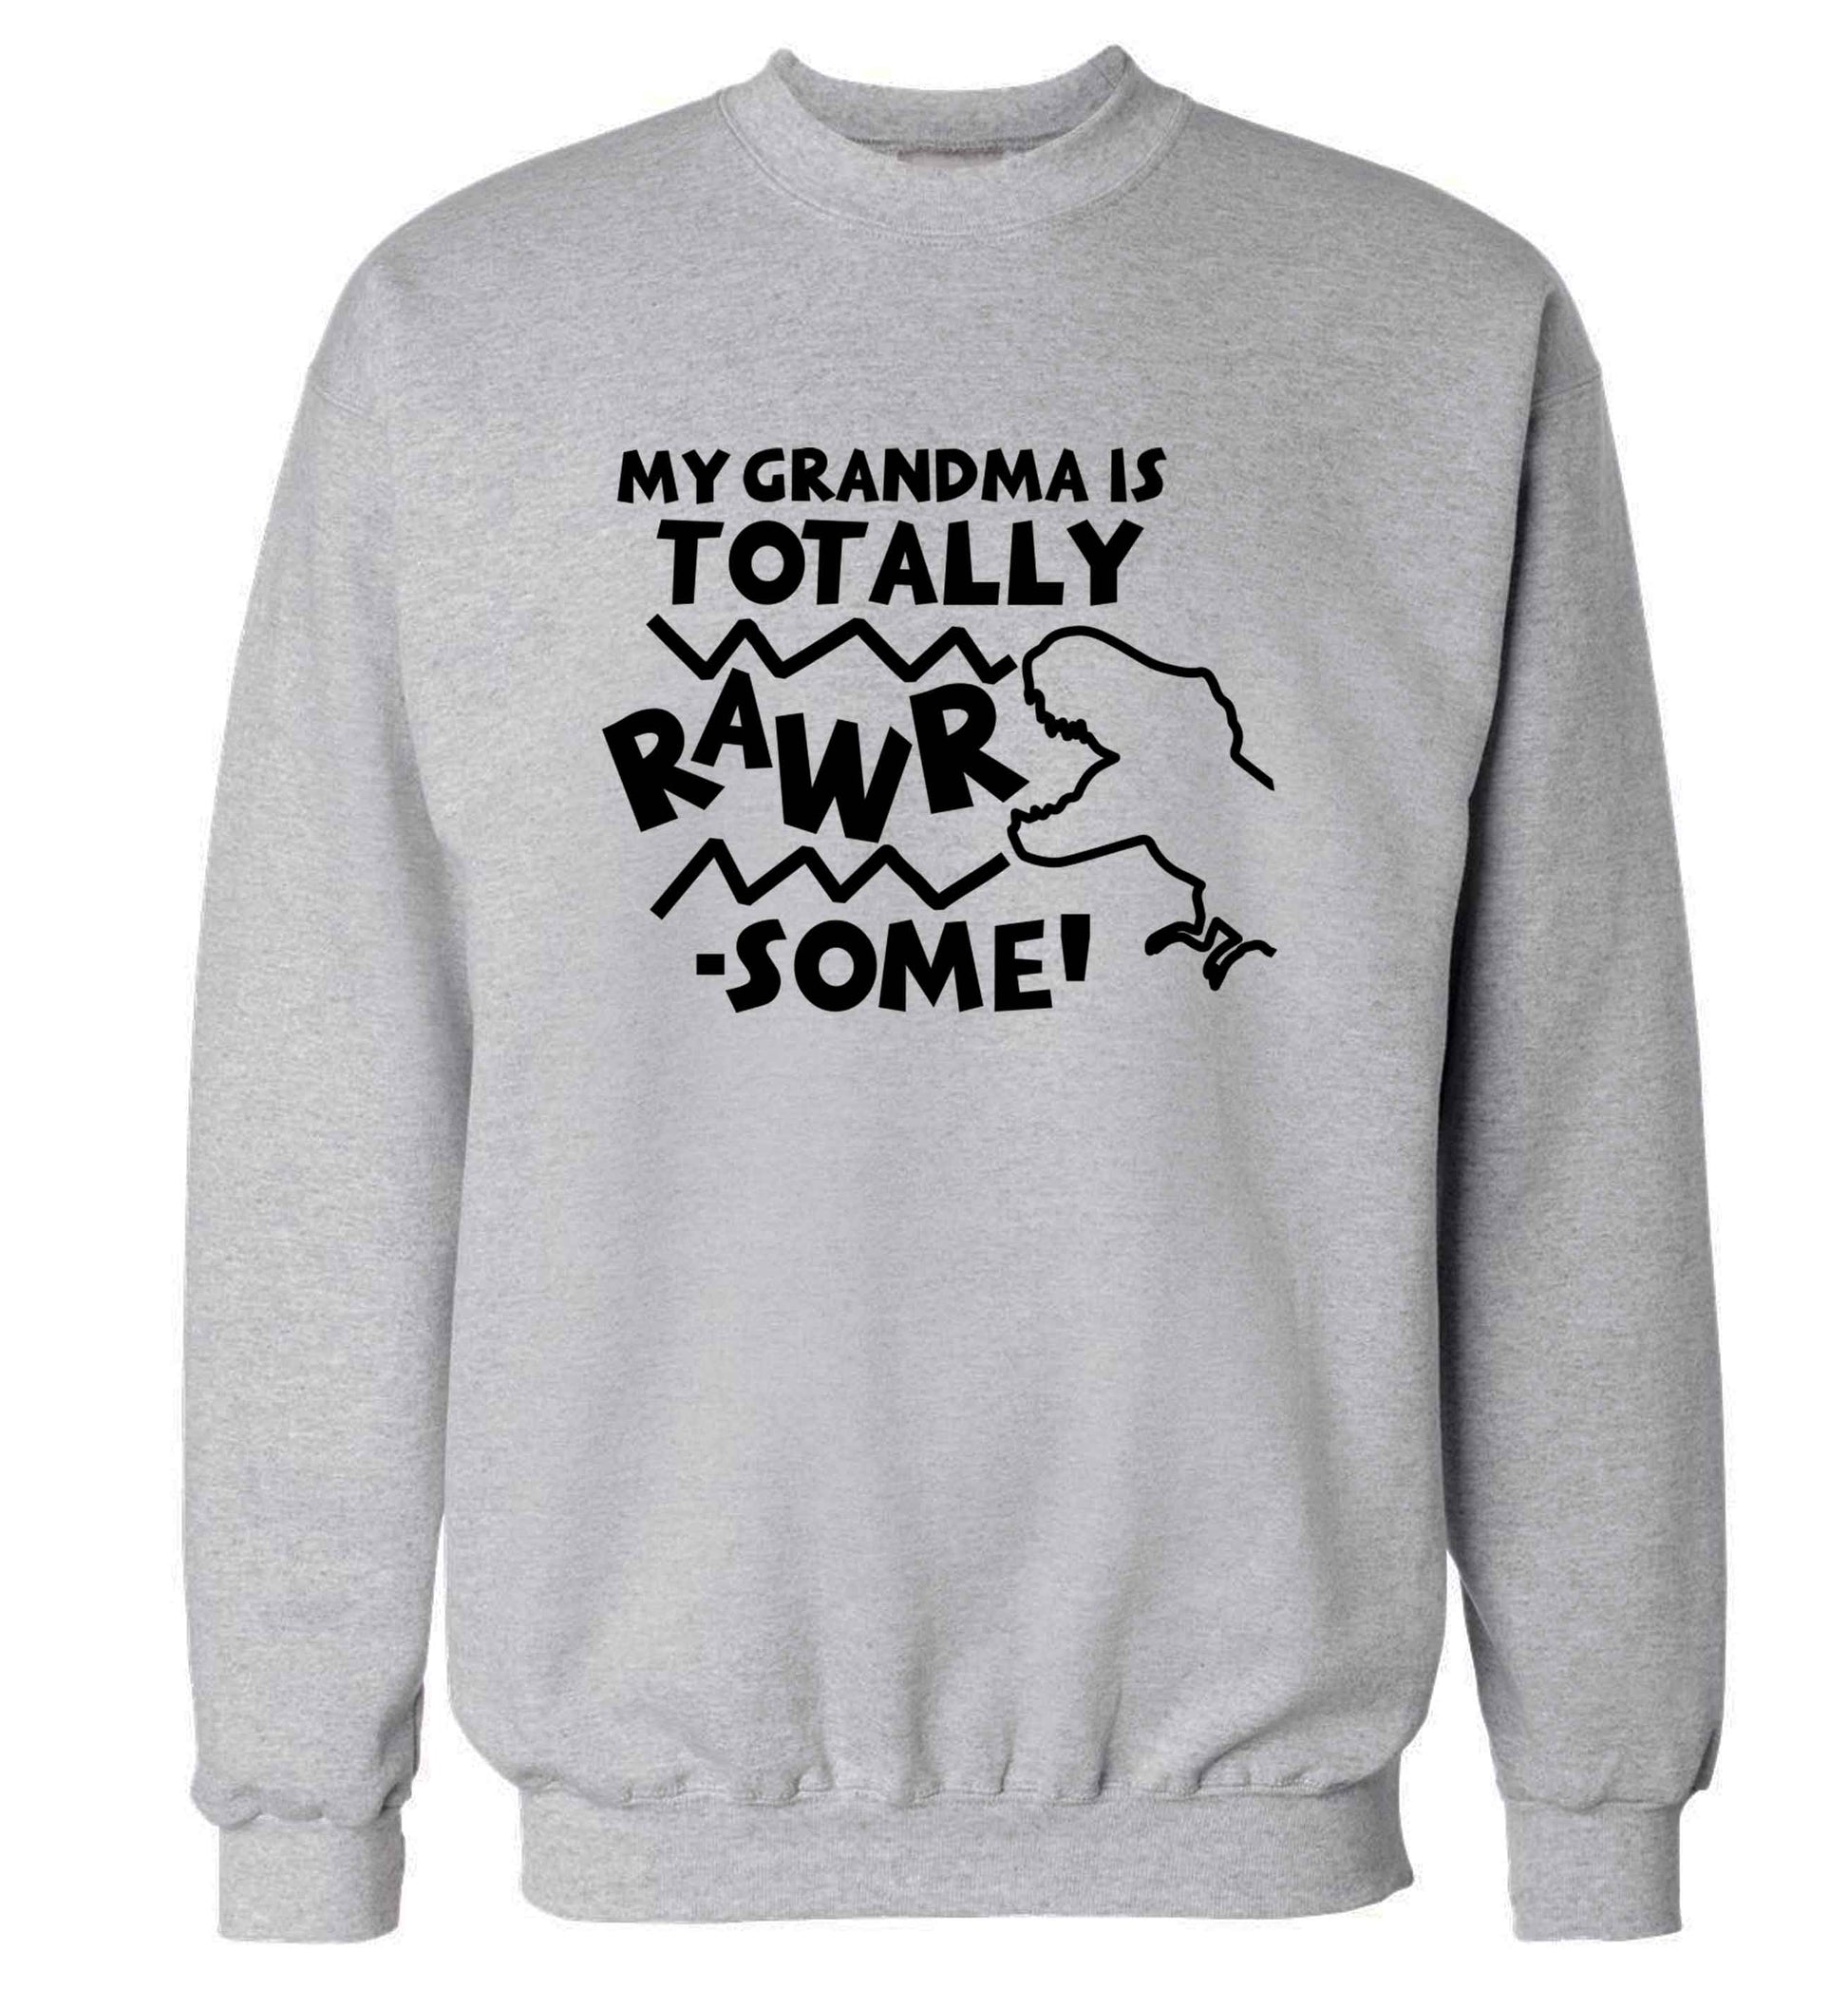 My grandma is totally rawrsome adult's unisex grey sweater 2XL